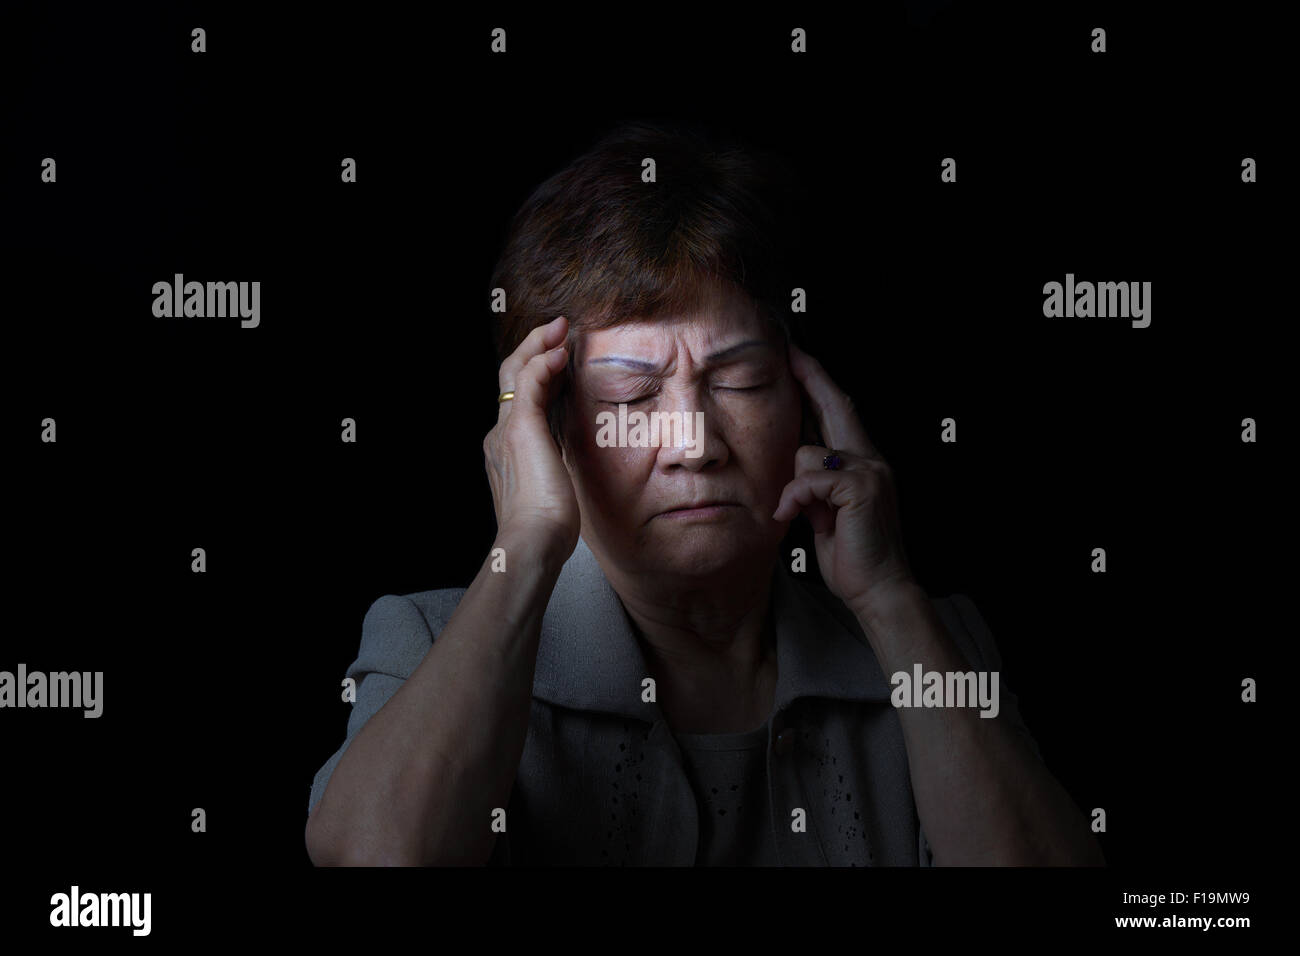 Senior woman touching the sides of her head with fingers while displaying pain on black background. Stock Photo